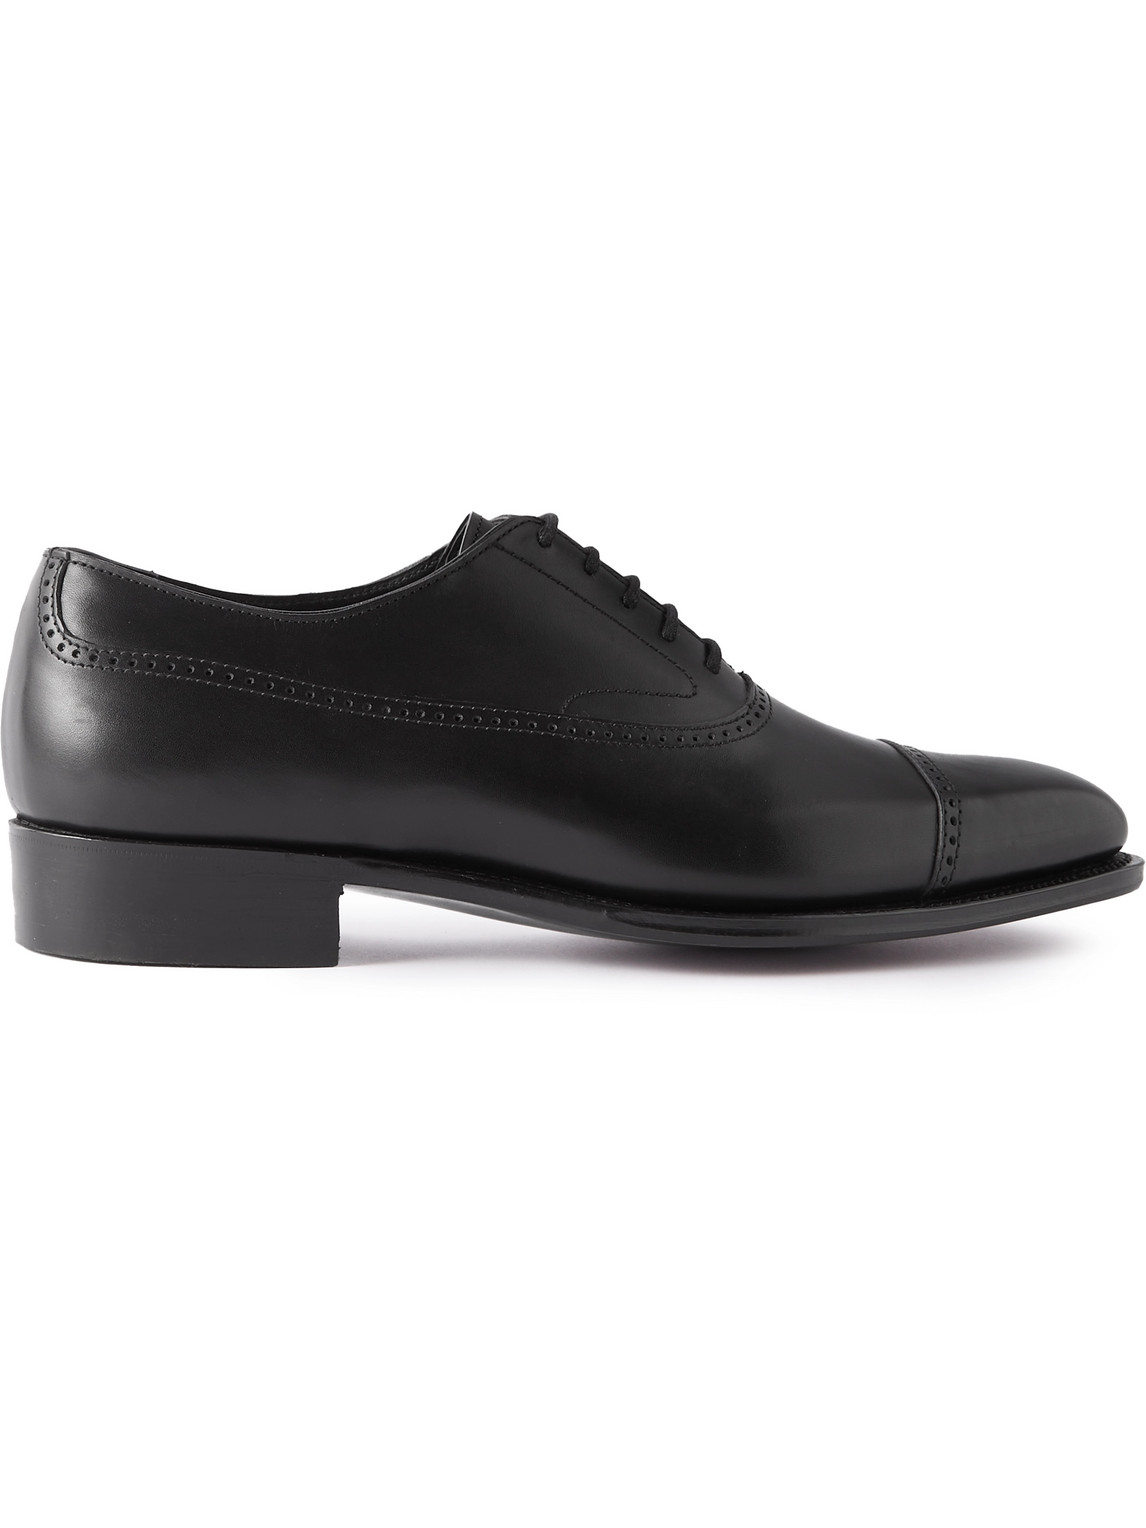 George Cleverley Charles Leather Oxford Shoes In Black